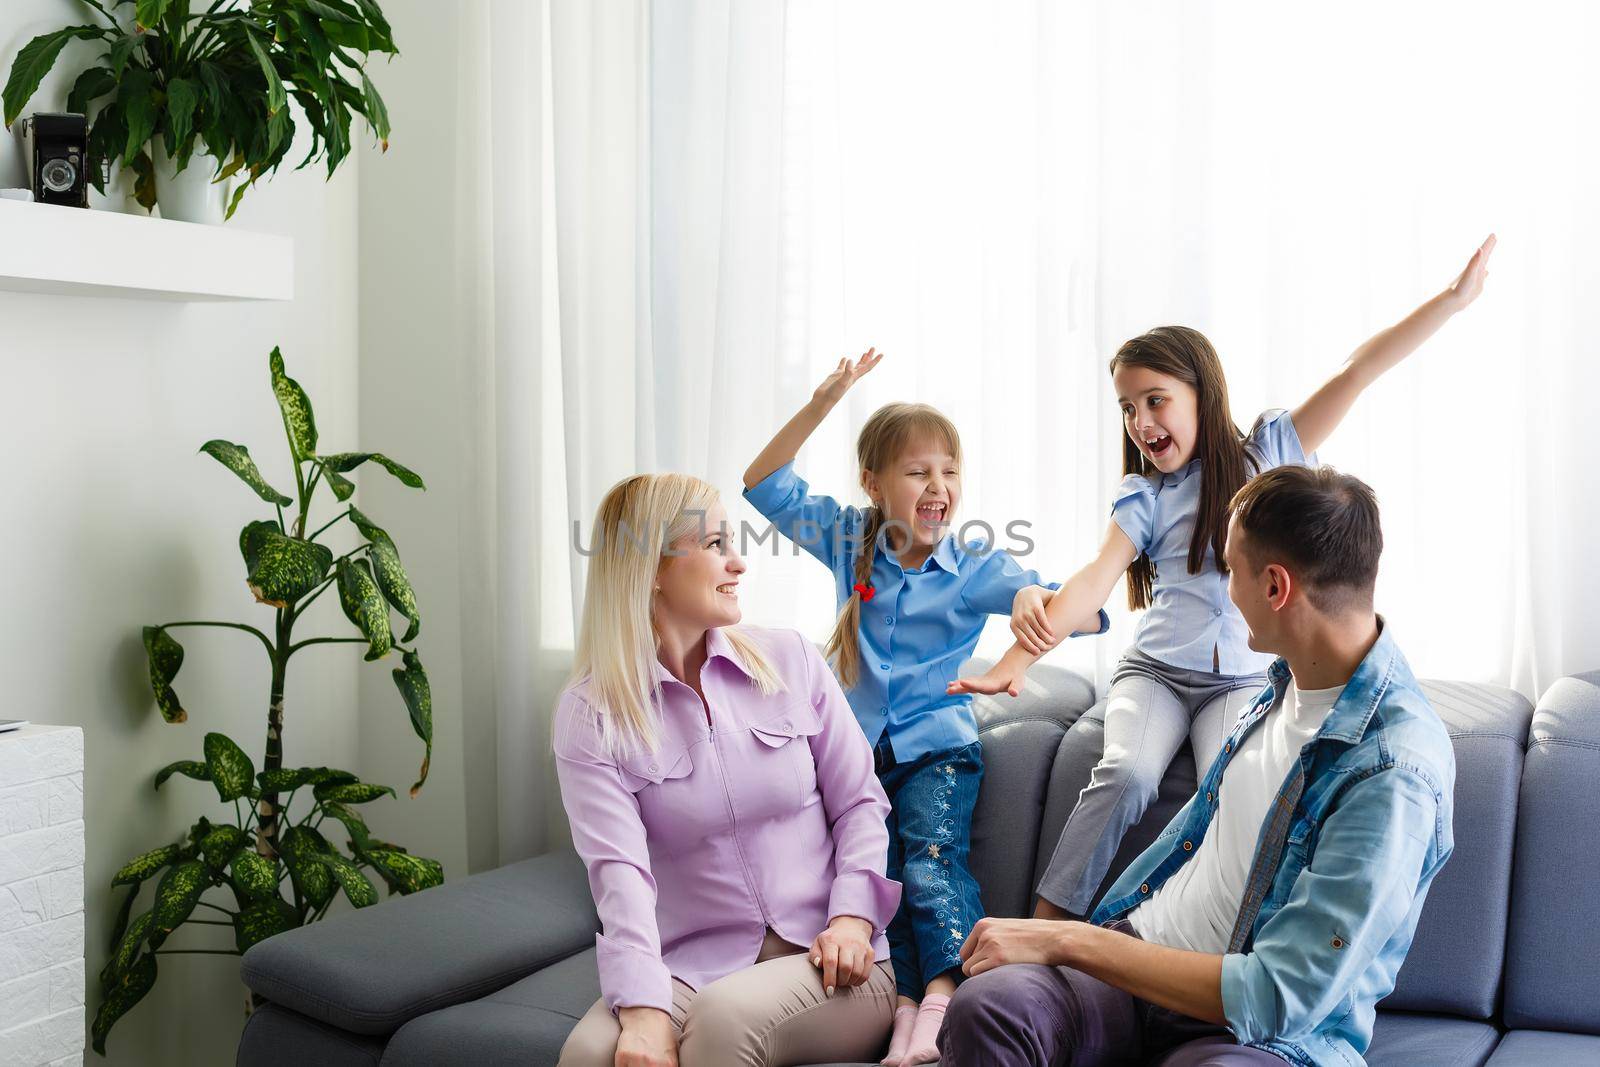 Cheerful young family with kids laughing sitting on couch together, parents with children enjoying entertaining at home